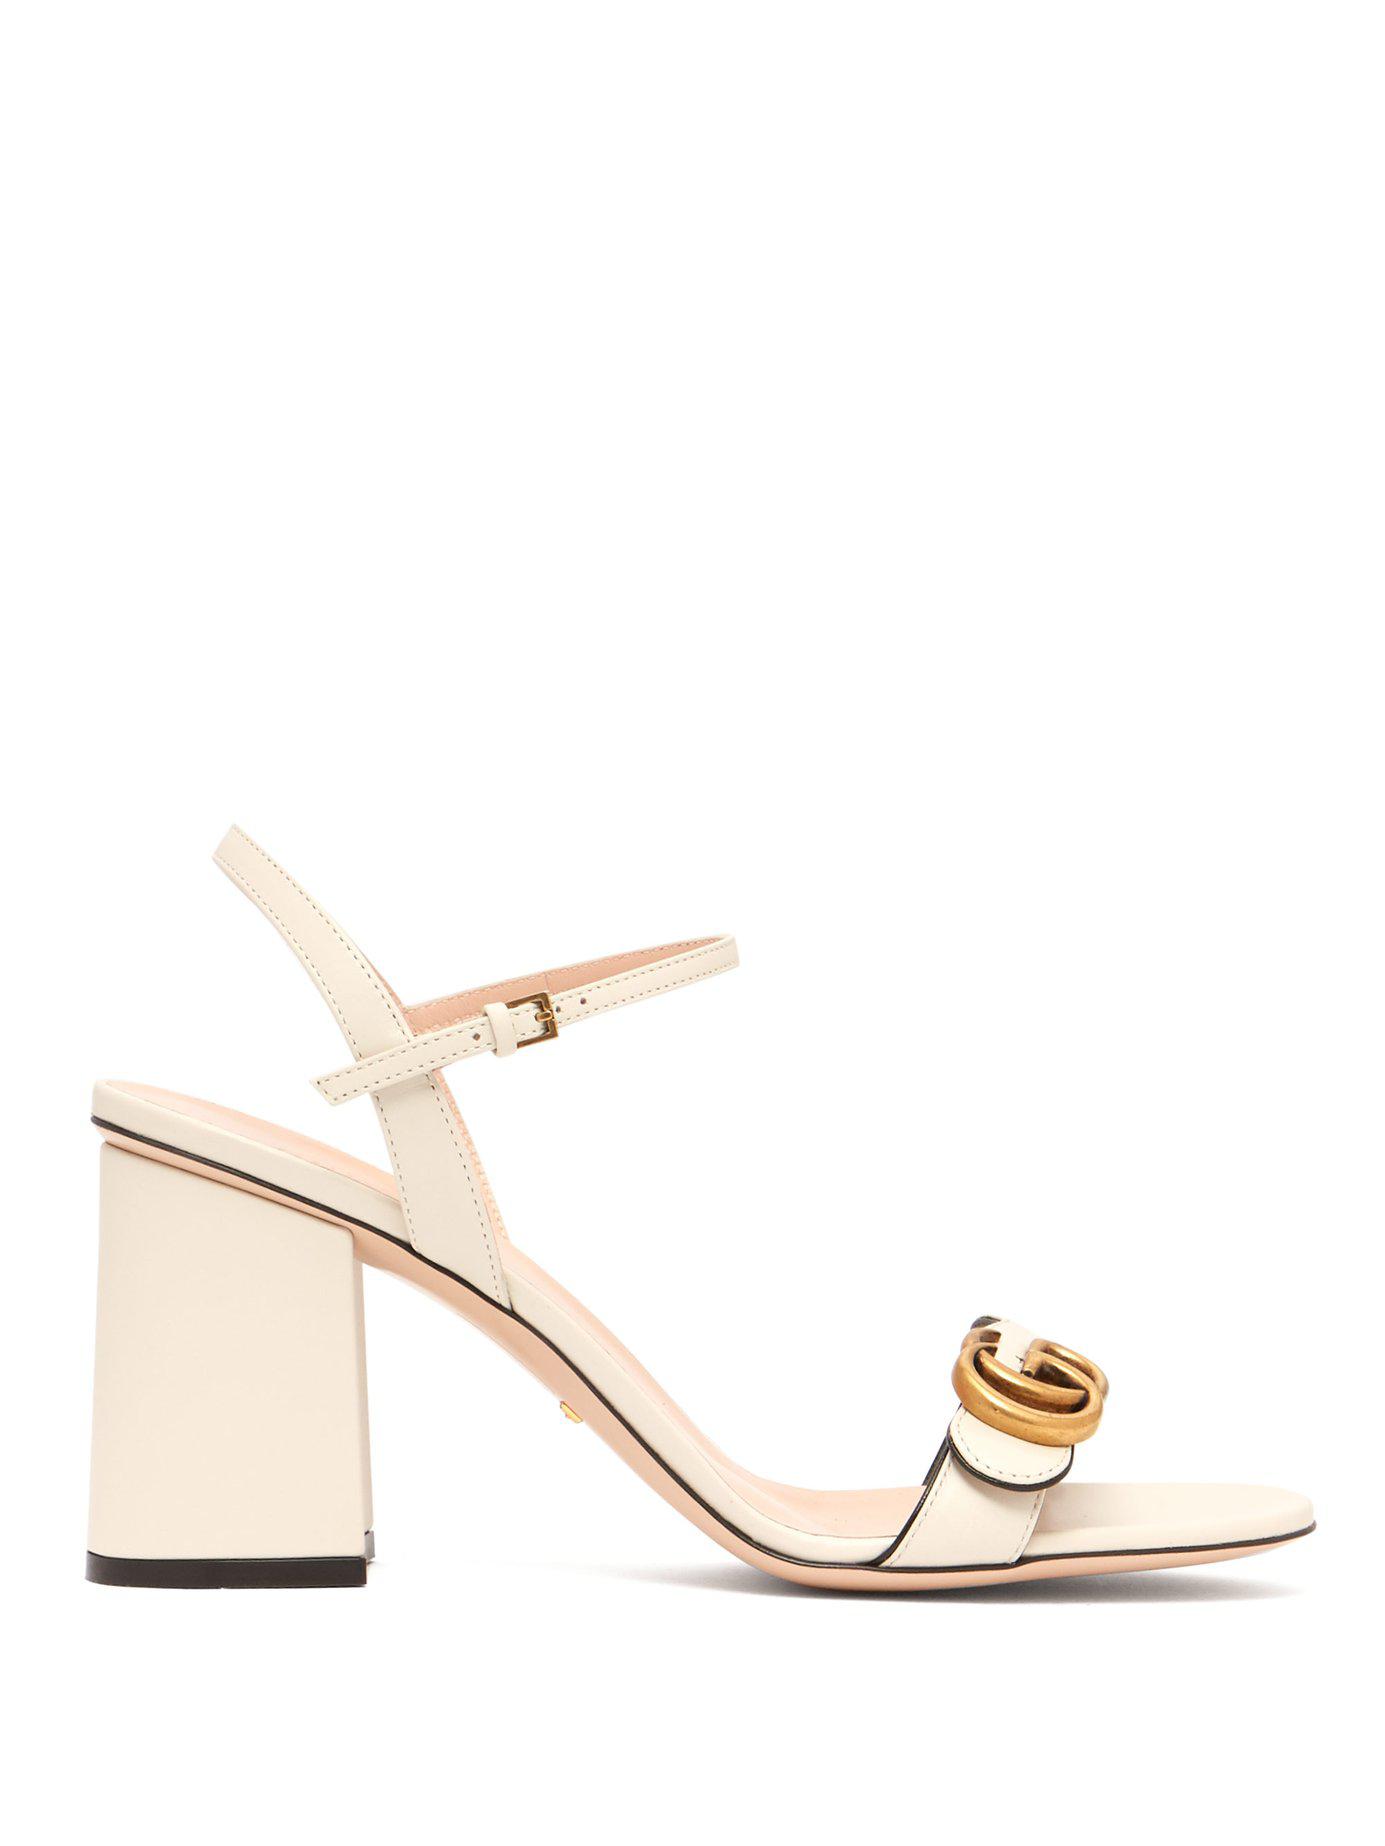 Gucci Gg Marmont Leather Block Heels in White | Lyst Canada